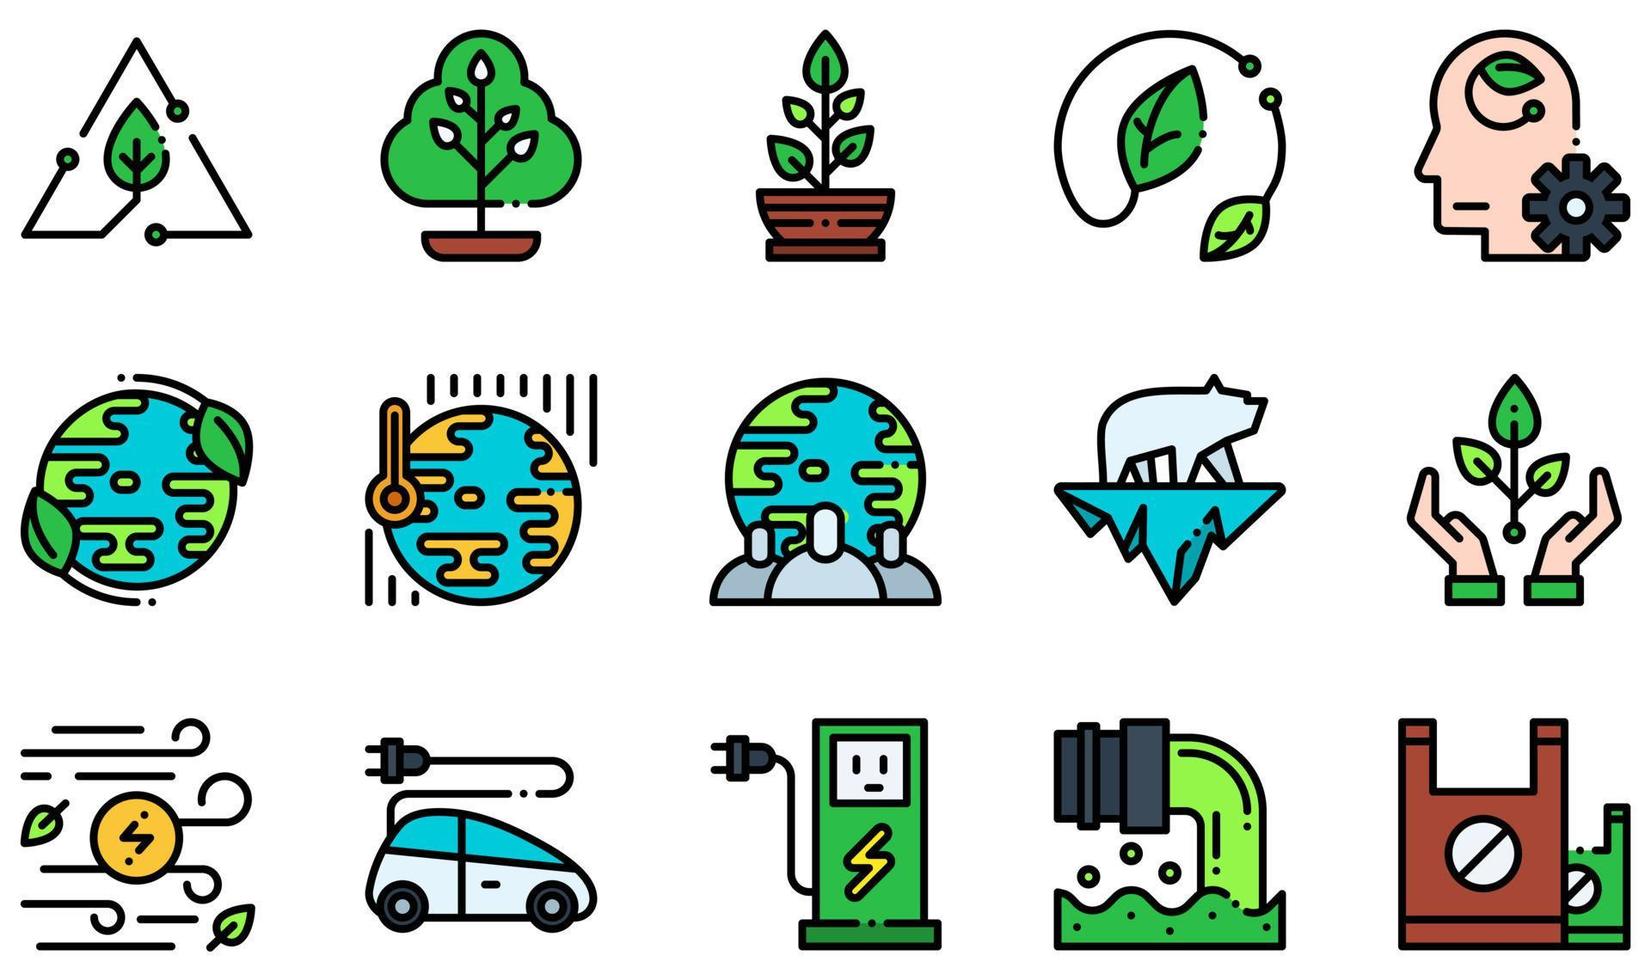 Set of Vector Icons Related to Ecology. Contains such Icons as Recycle, Tree, Plant, Leaf, Ecological Mind, World Ecology and more.